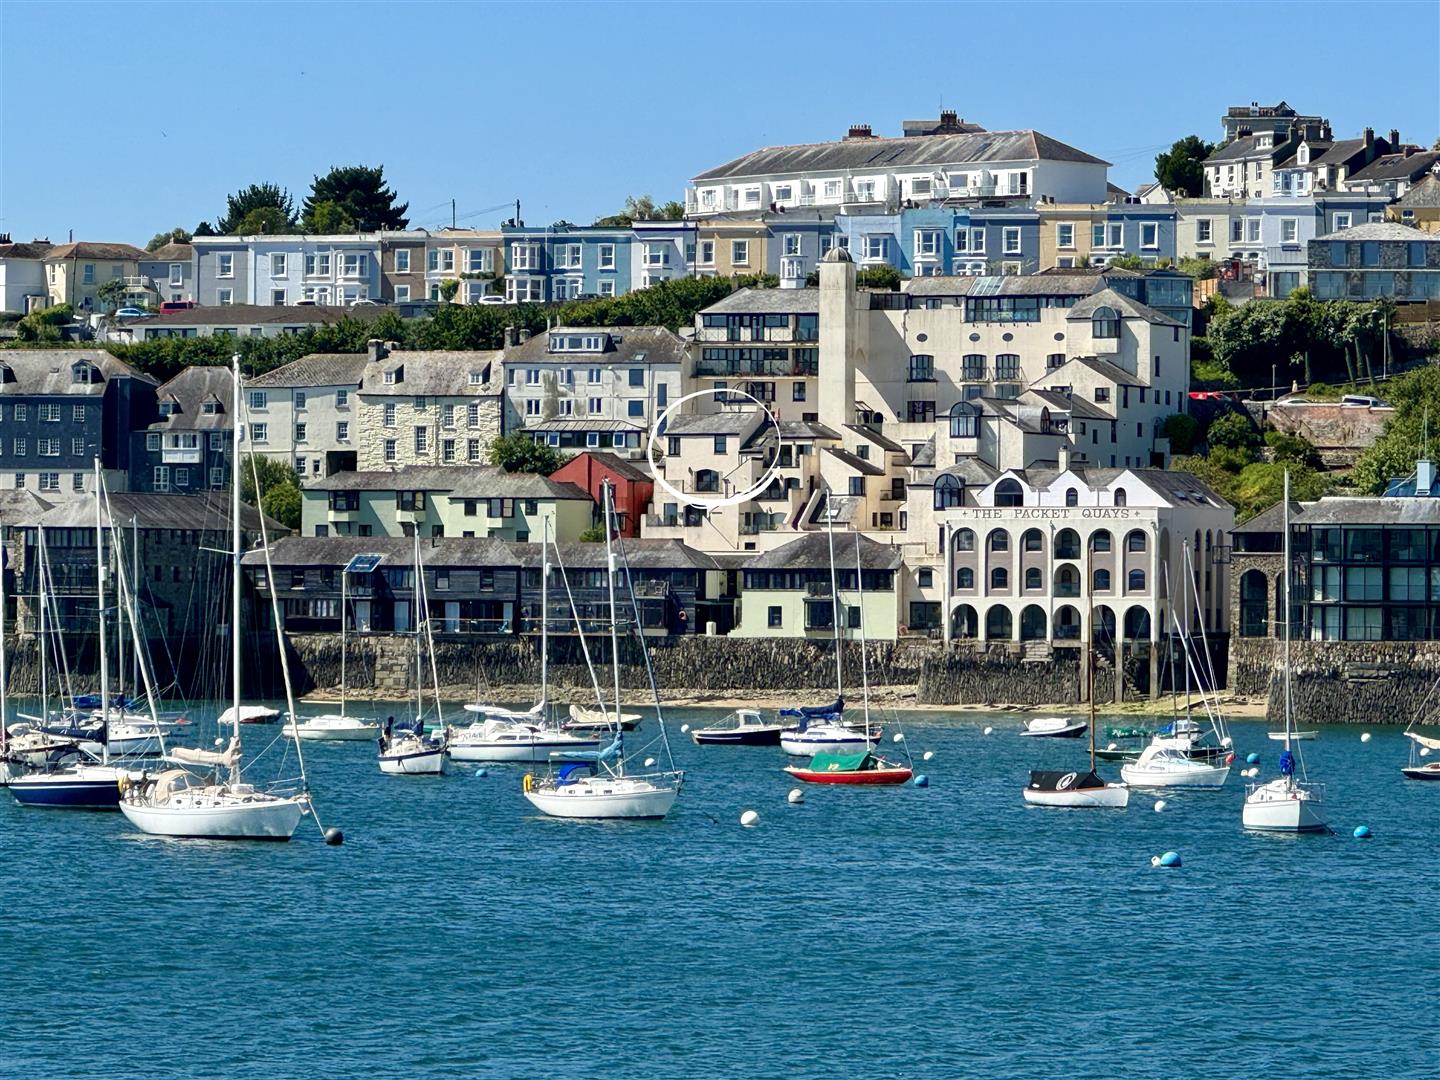 The Packet Quays, Falmouth Property Image